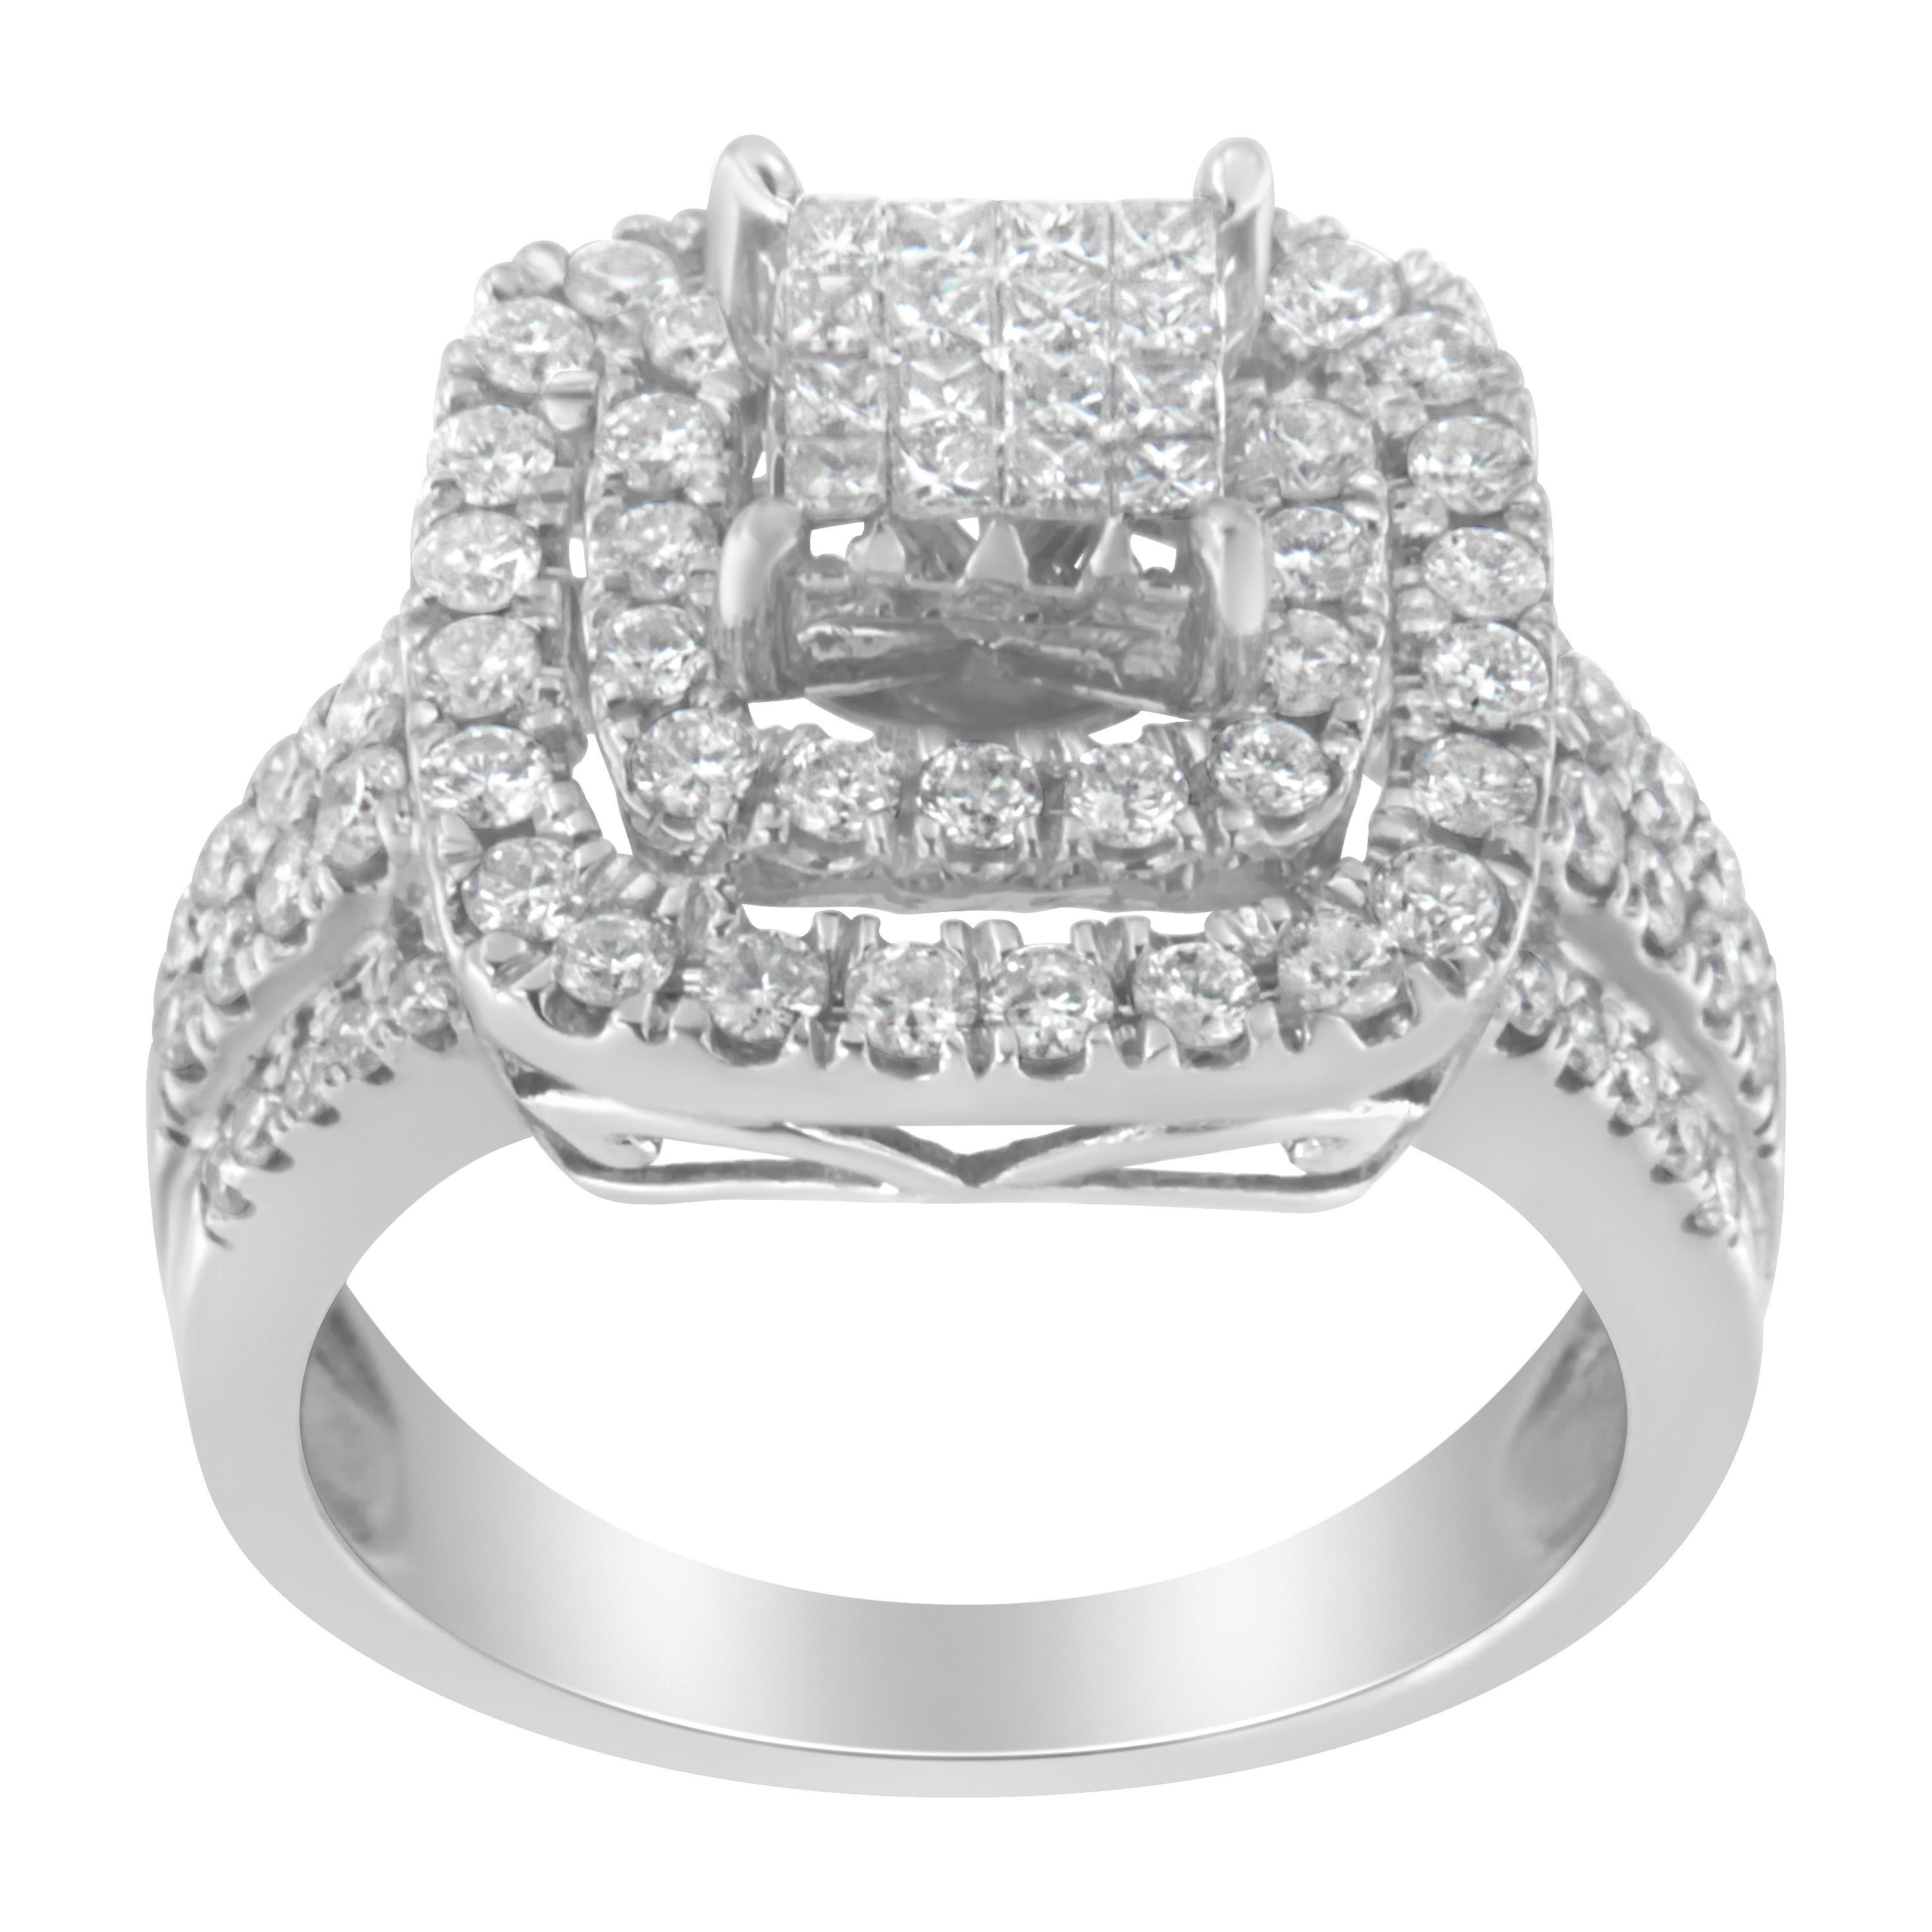 Contemporary 14k White Gold 1 ½ Carat Diamond Double Halo Cocktail Ring For Sale